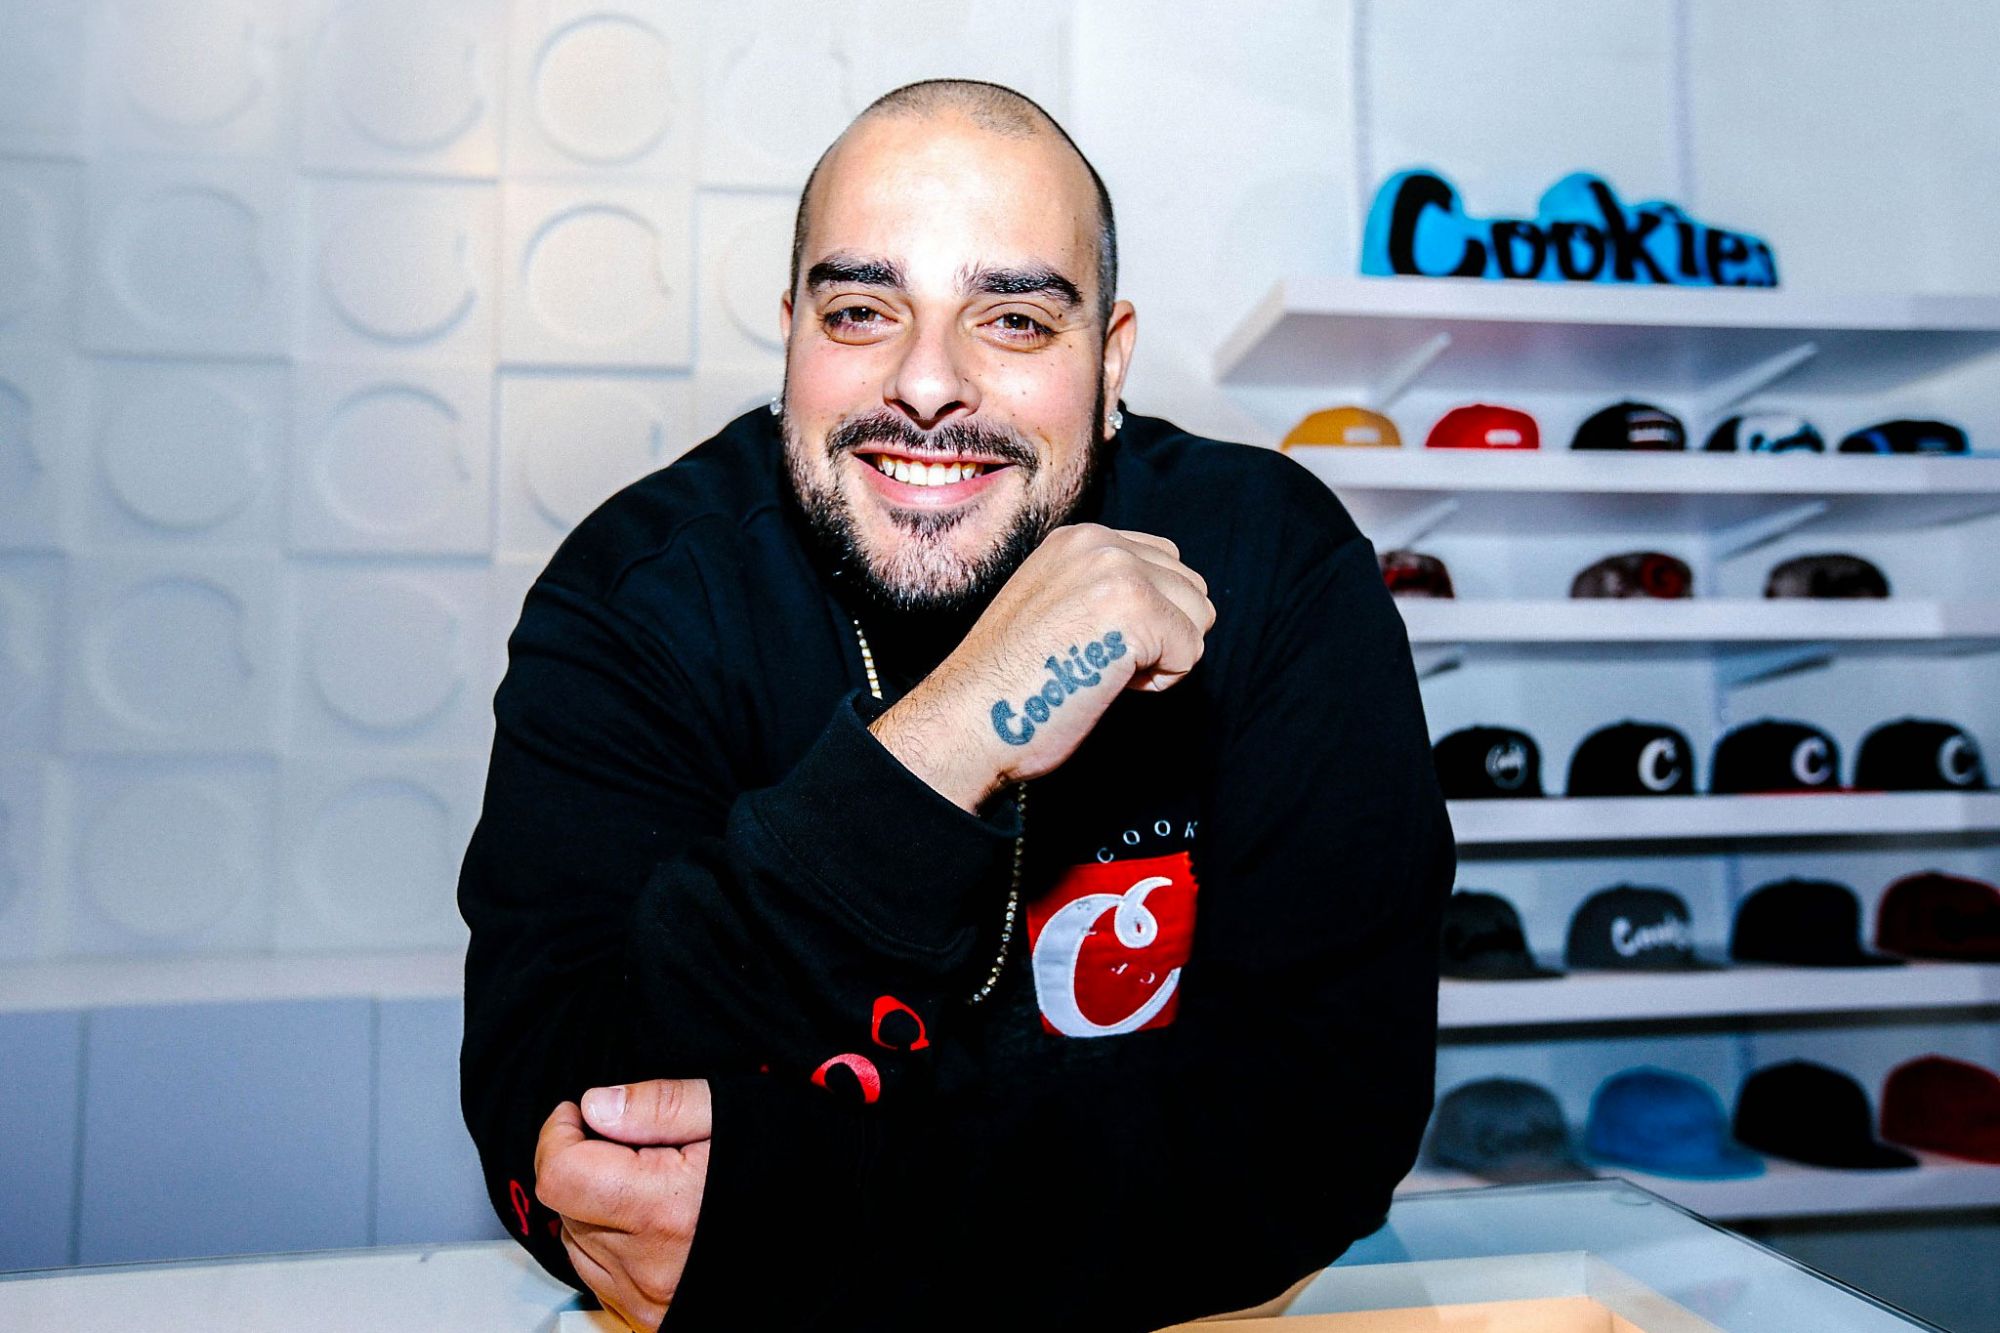 Who is Berner? Bio, Age, Business, Family and Net Worth